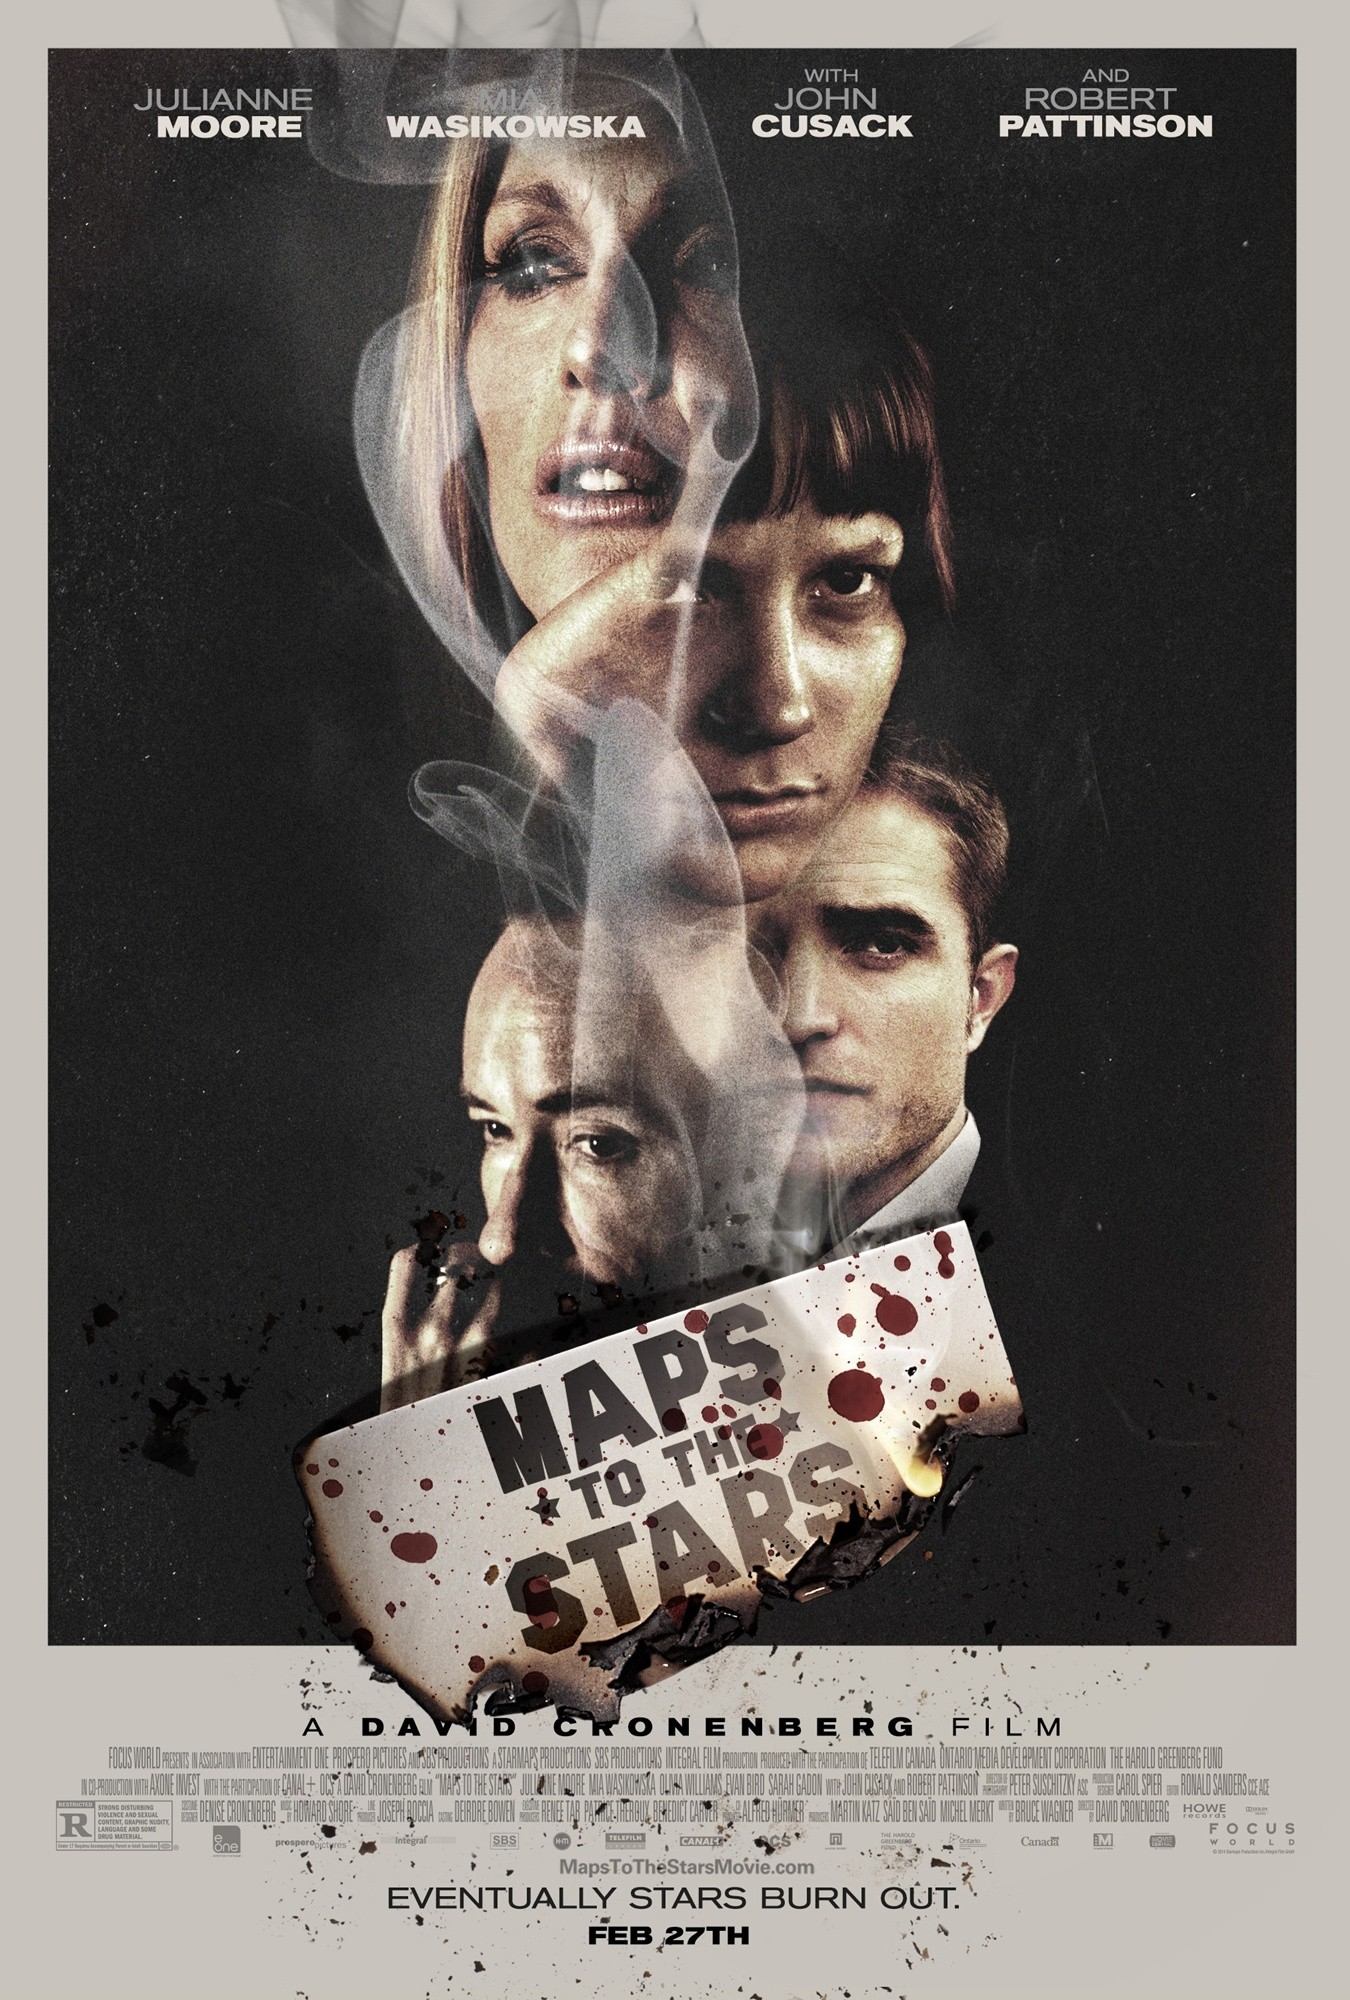 Poster of Focus World's Maps to the Stars (2015)